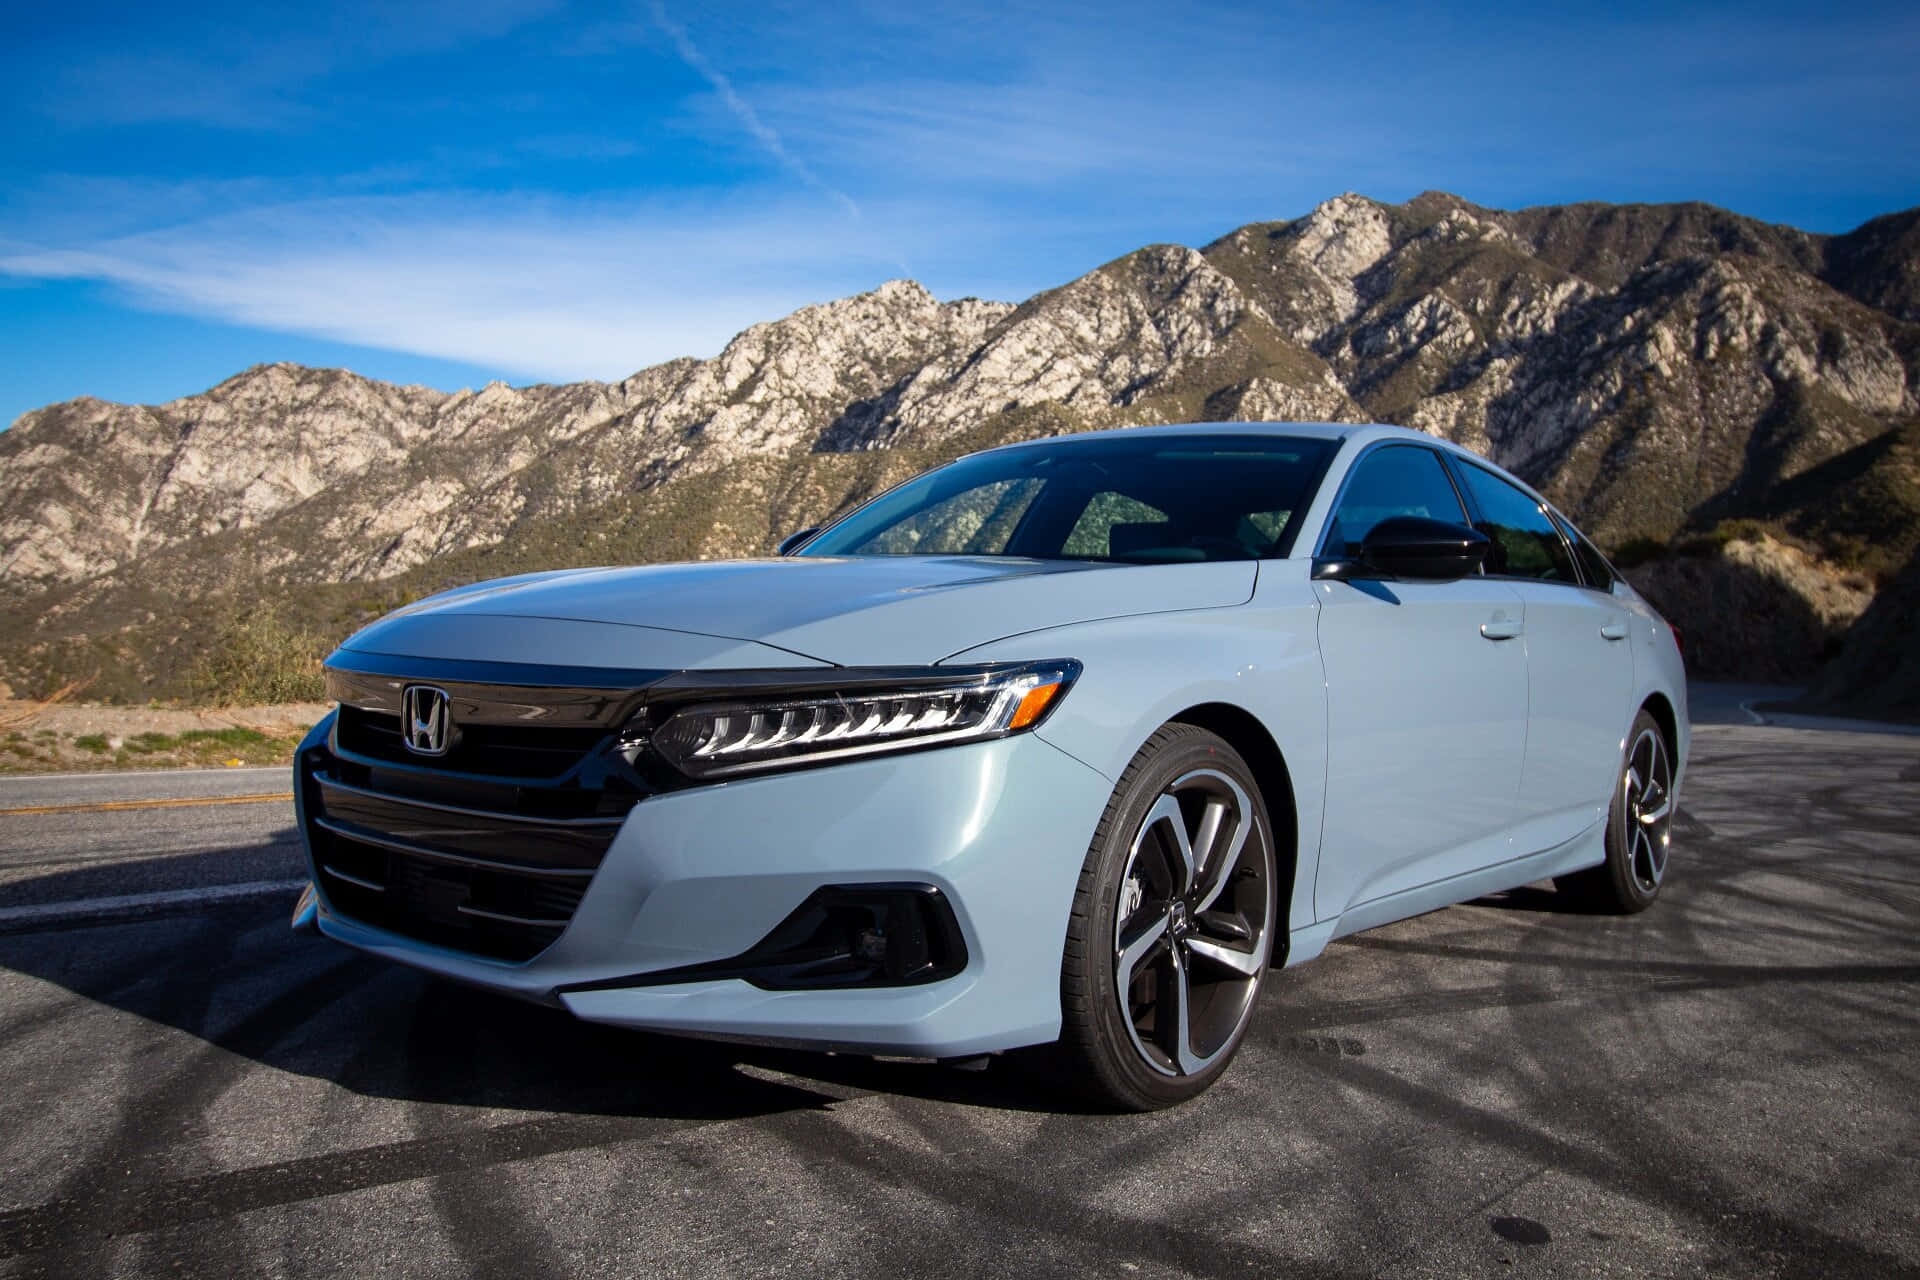 Download A Sleek And Stylish Honda Accord On The Road Wallpaper